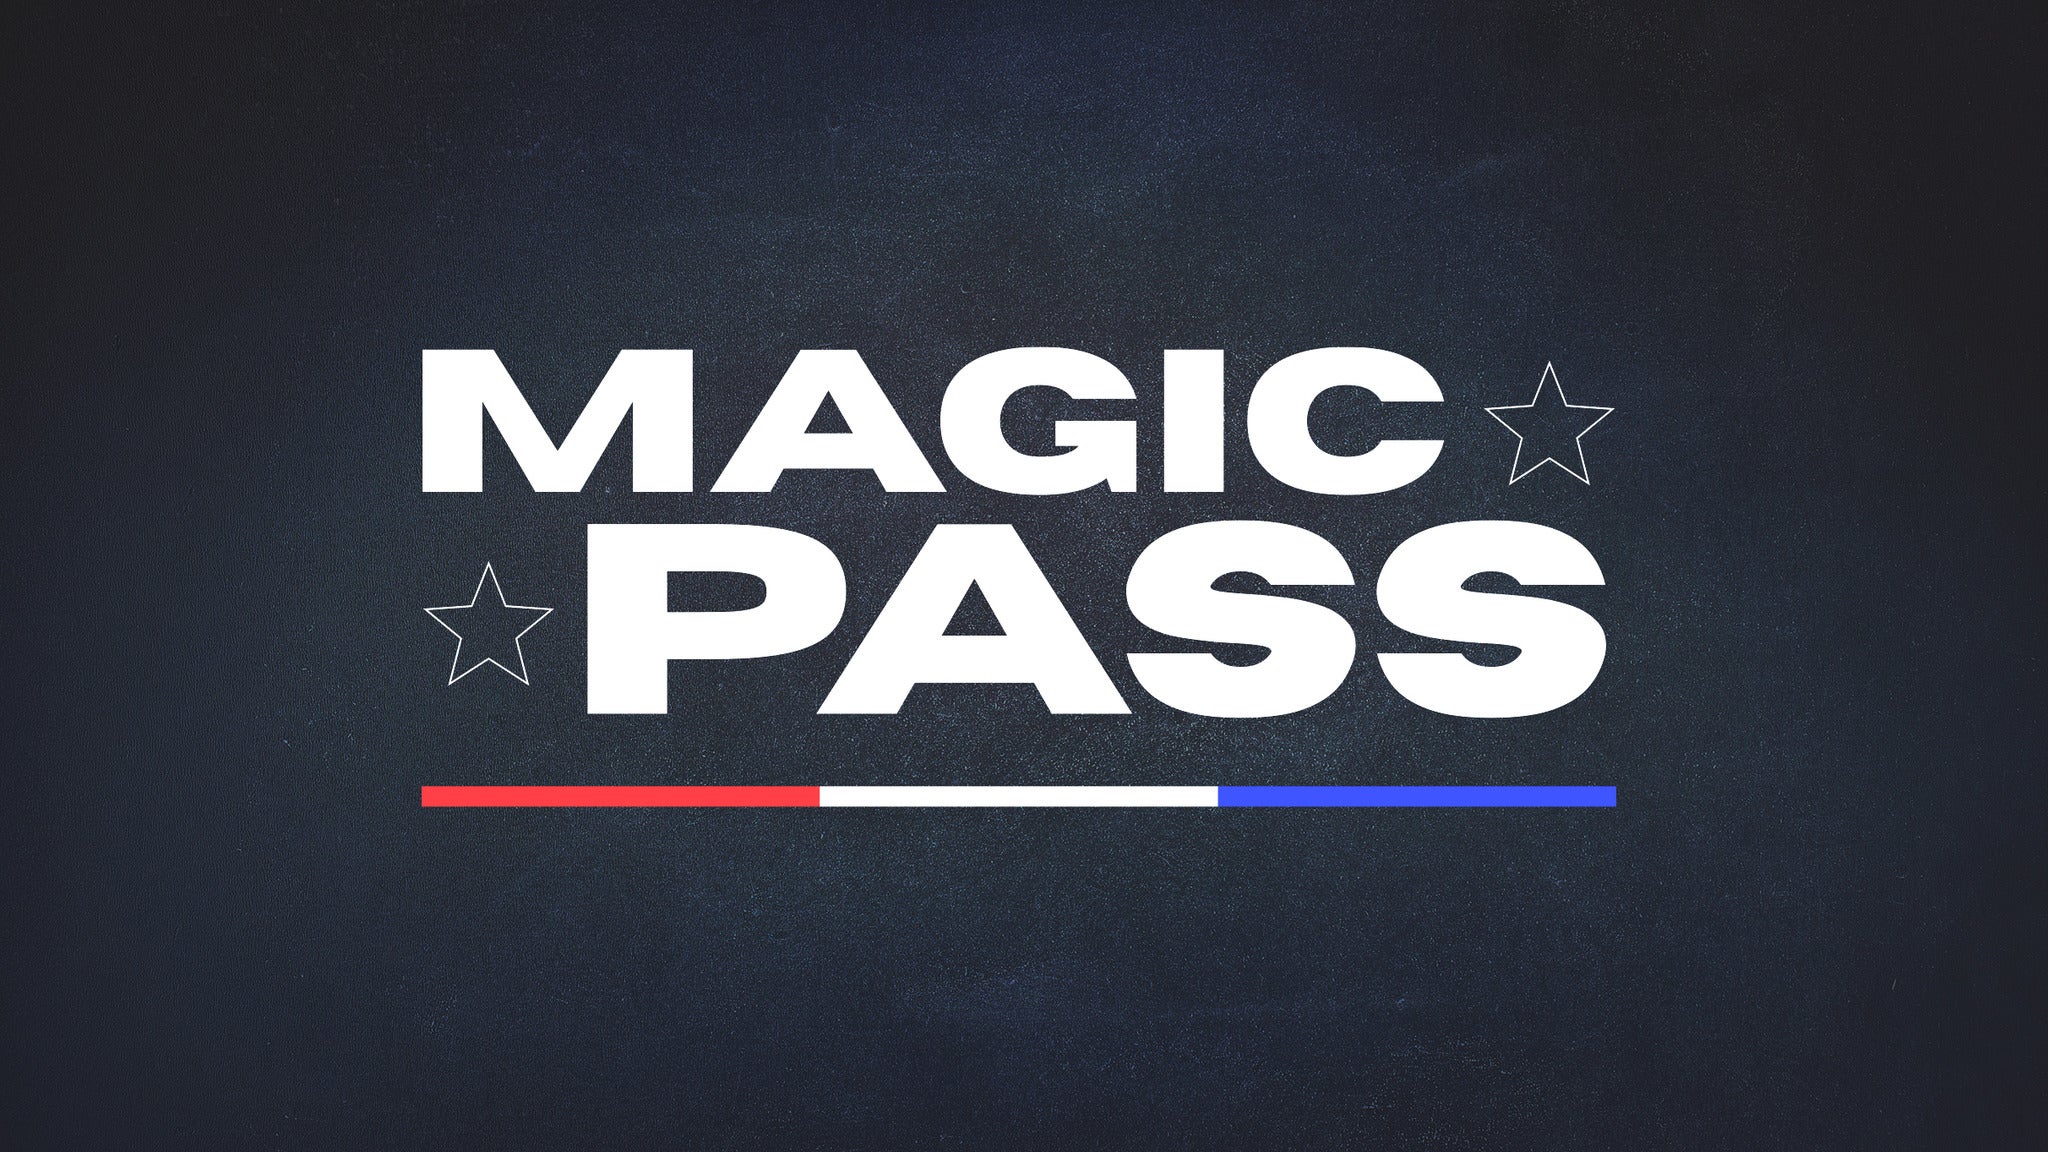 Magic Passs: 30-minute Interactive Event From 12:30 PM-1:00 PM in Southaven promo photo for Exclusive presale offer code